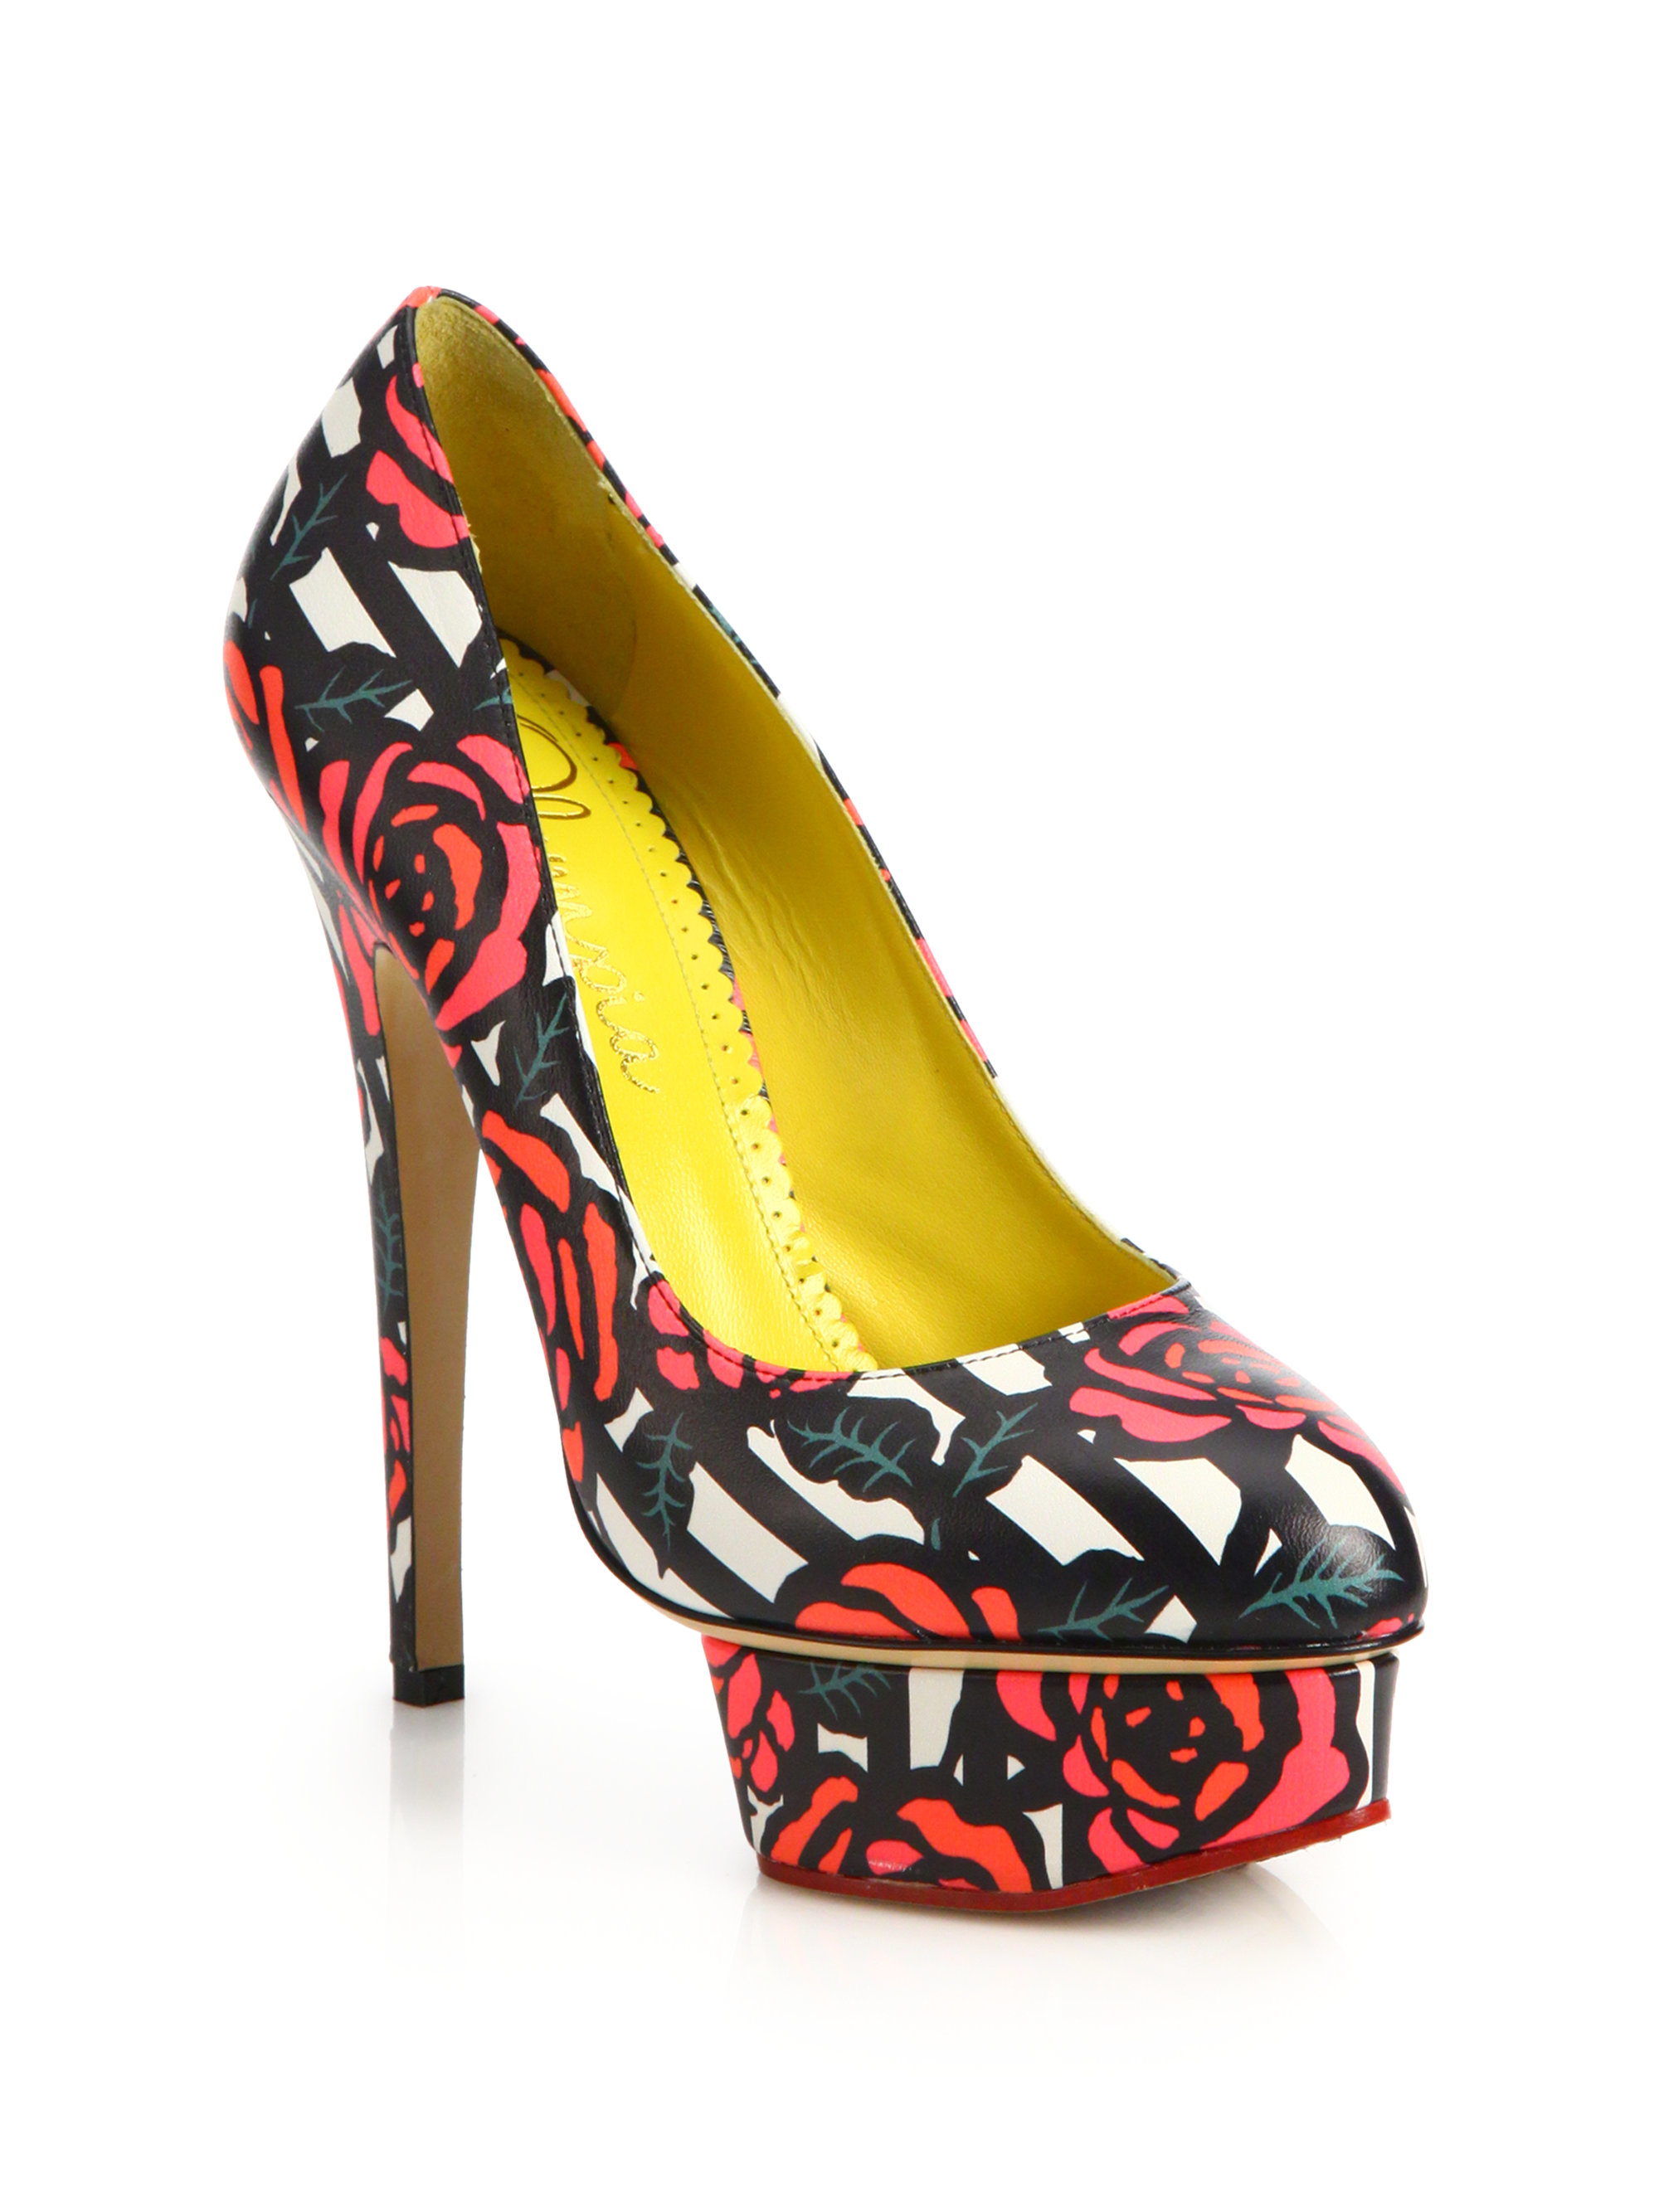 Lyst - Charlotte Olympia Rose-print Dolly Leather Platform Pumps